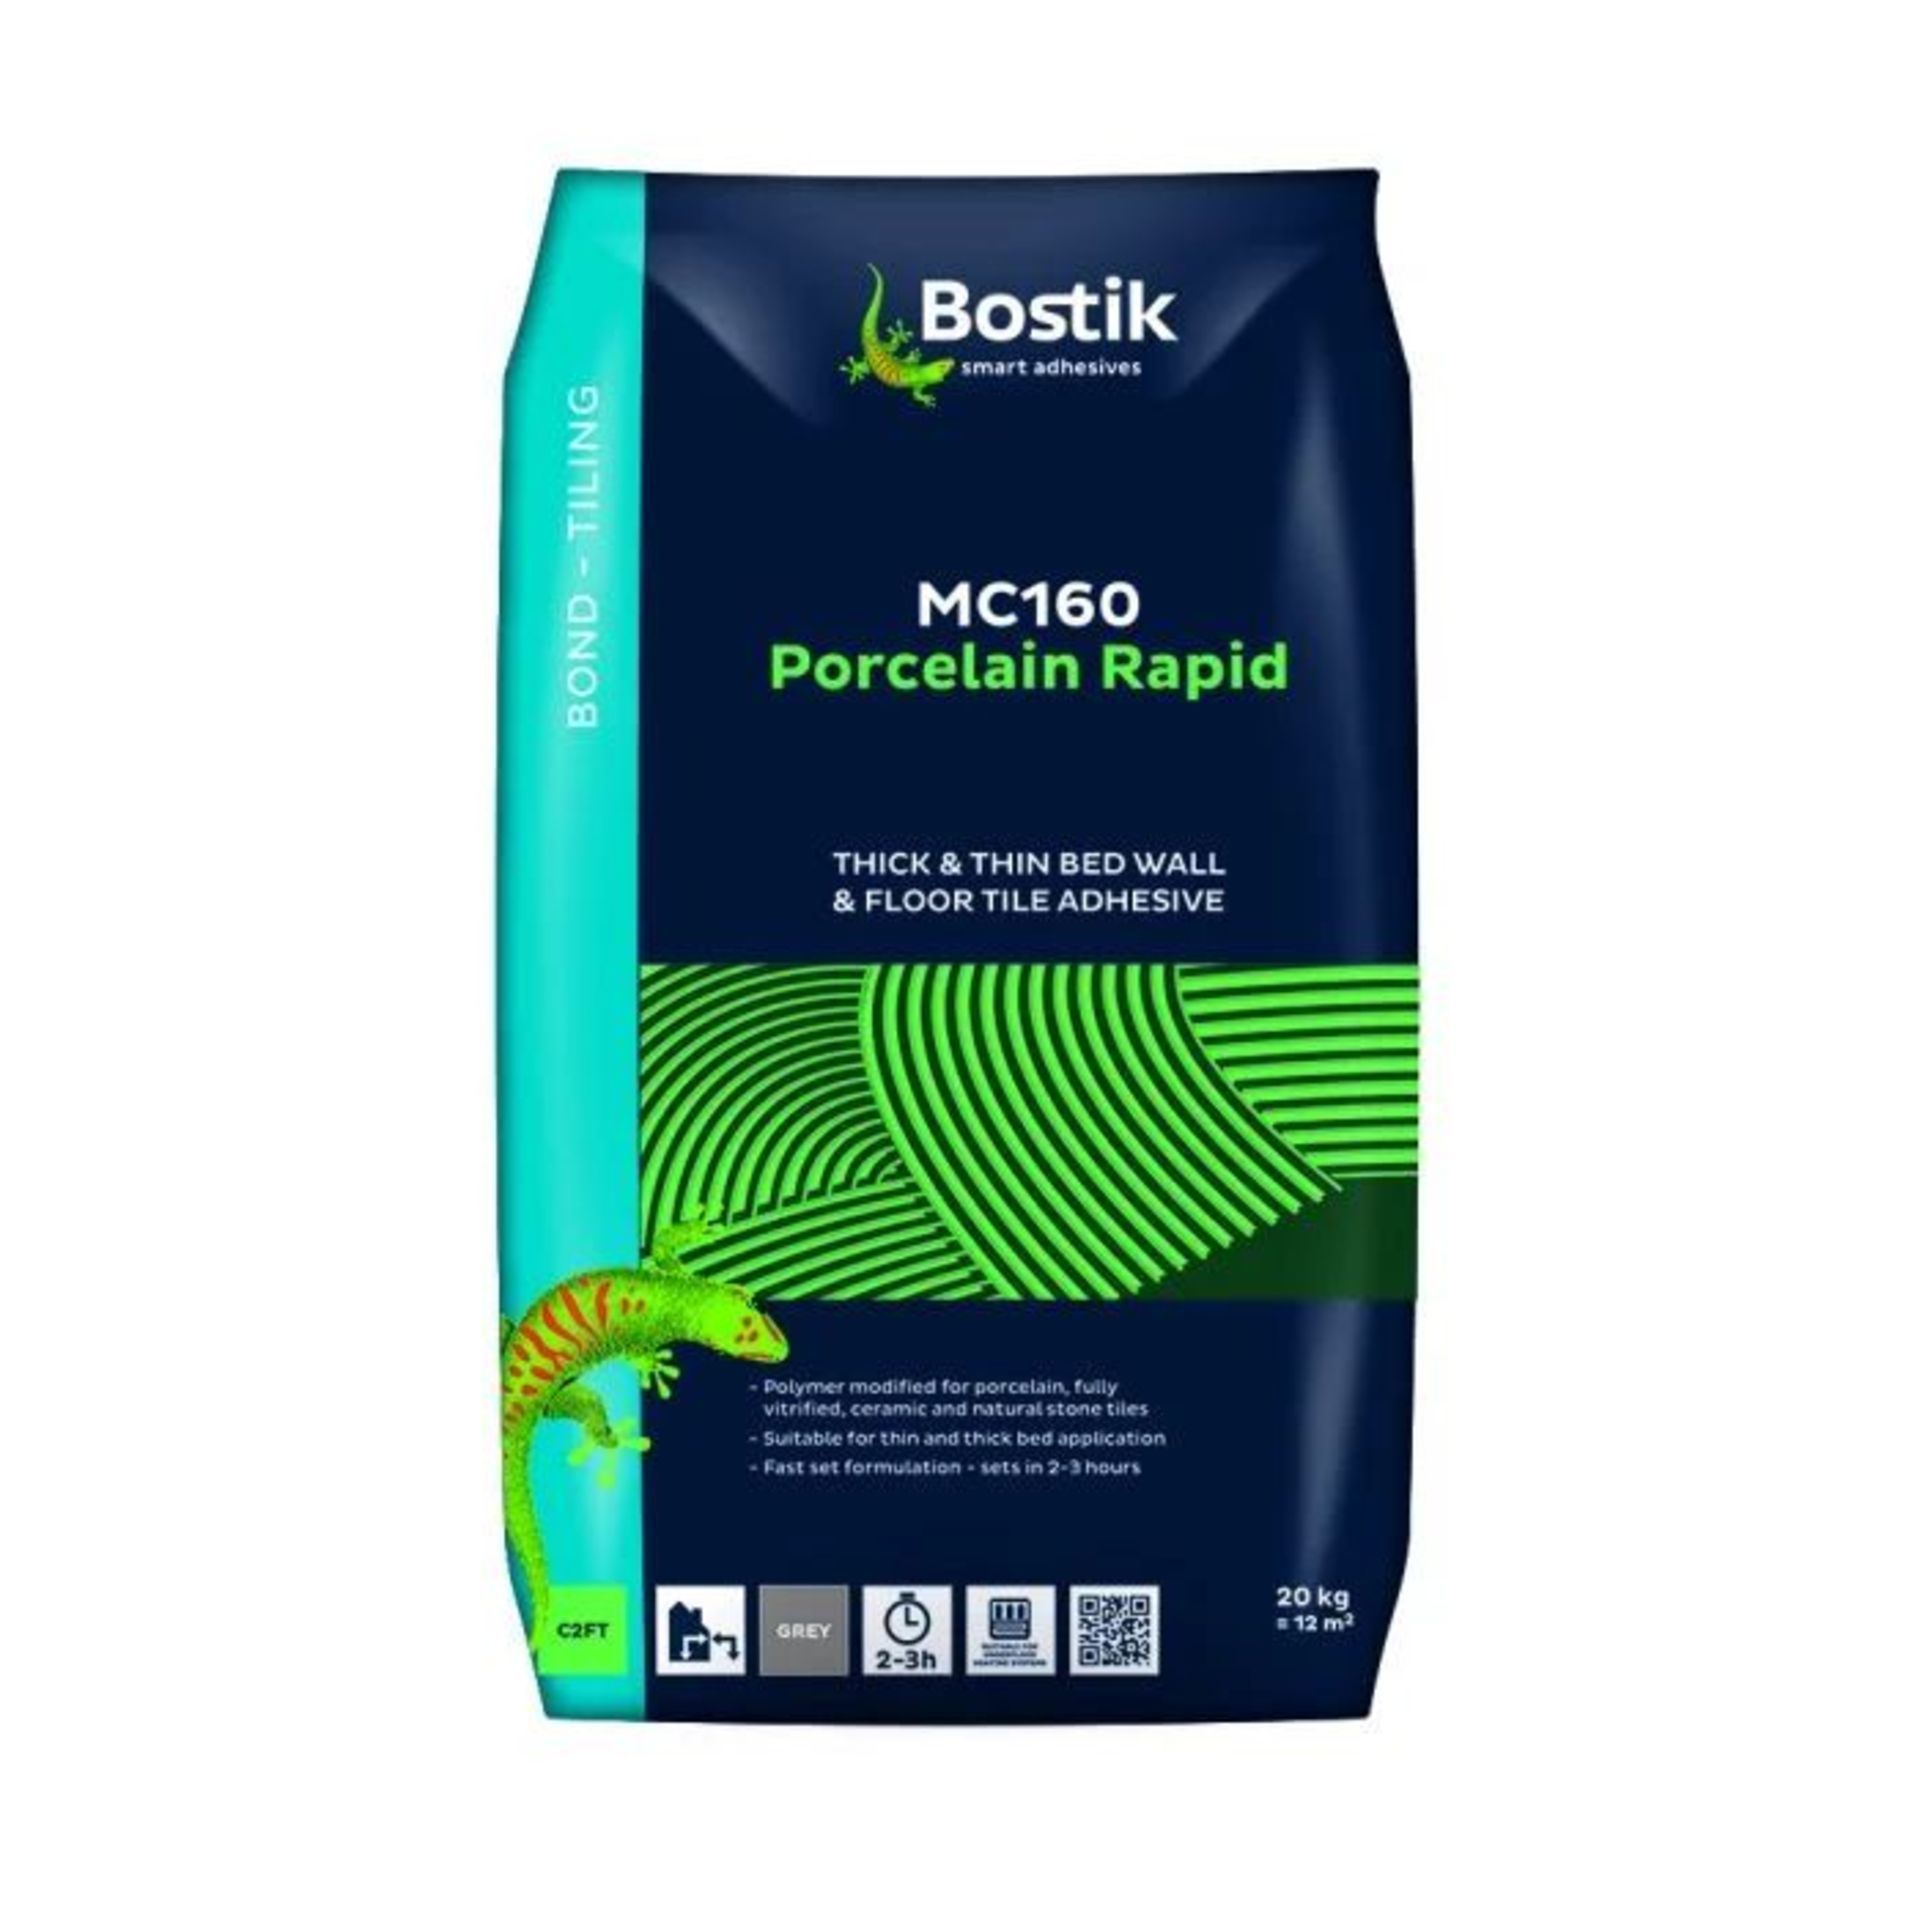 12 X BRAND NEW BOSTIK MC160 PORCELAIN RAPID MC160 THICK AND THIN BED WALL AND FLOOR TILE ADHESIVE